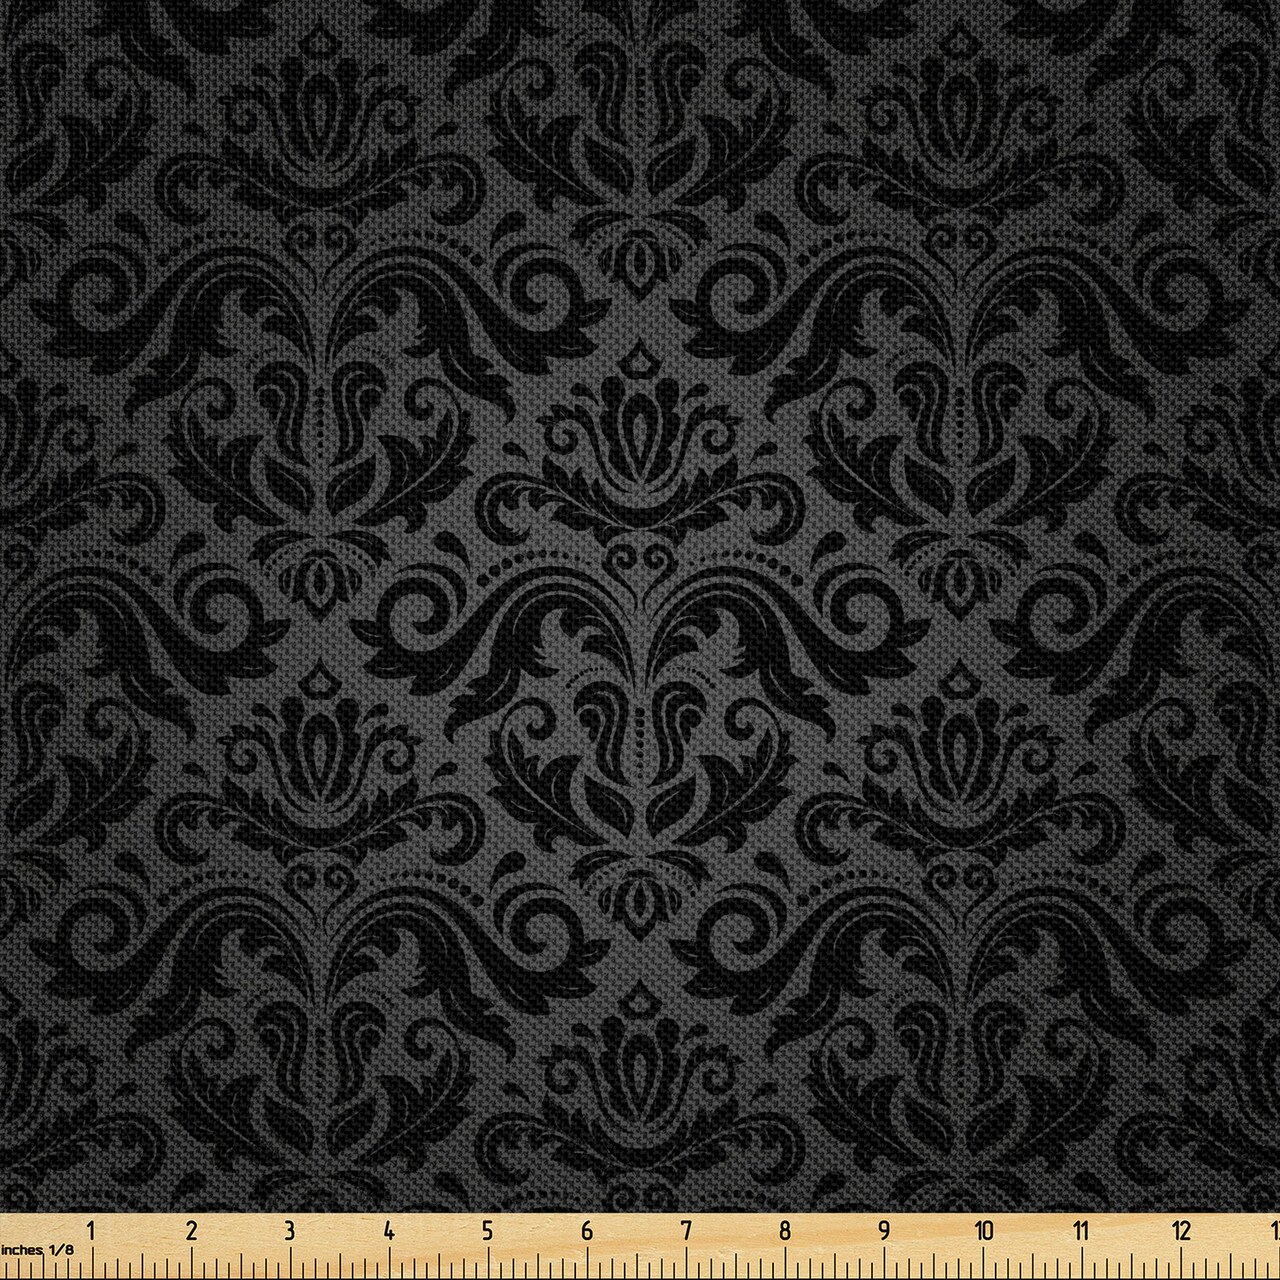 Ambesonne Dark Grey Fabric by The Yard, Black Damask and Floral Elements Oriental Antique Ornament Vintage, Decorative Satin Fabric for Home Textiles and Crafts, 10 Yards, Black Grey